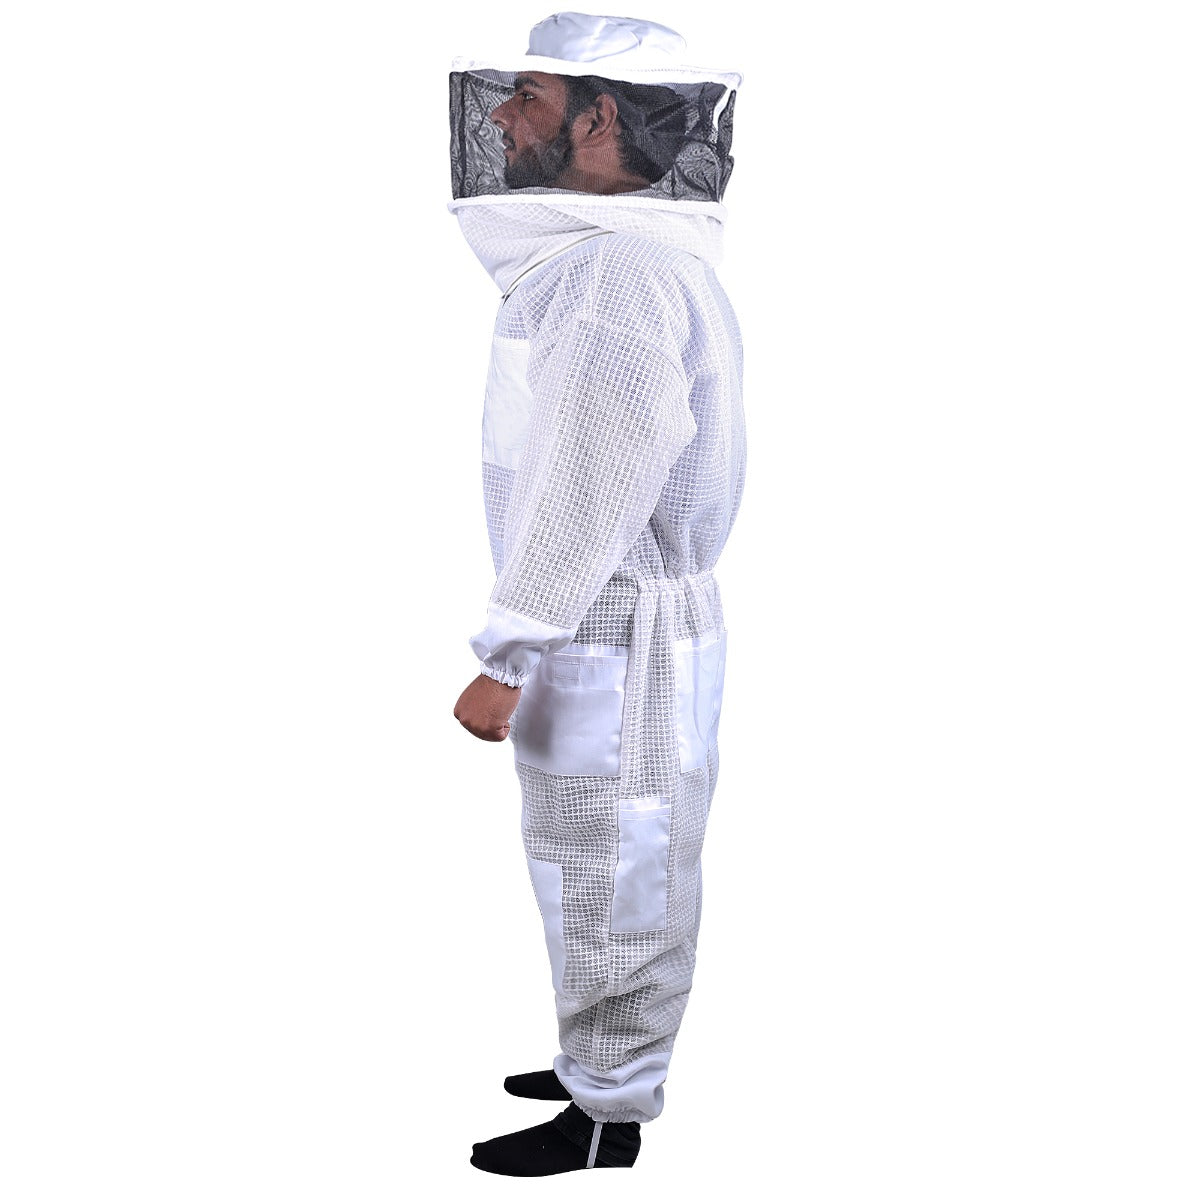 Beekeeping Full Suit, Ultra Cool, Round Head Protective Gear - Sizes: S - 5XL